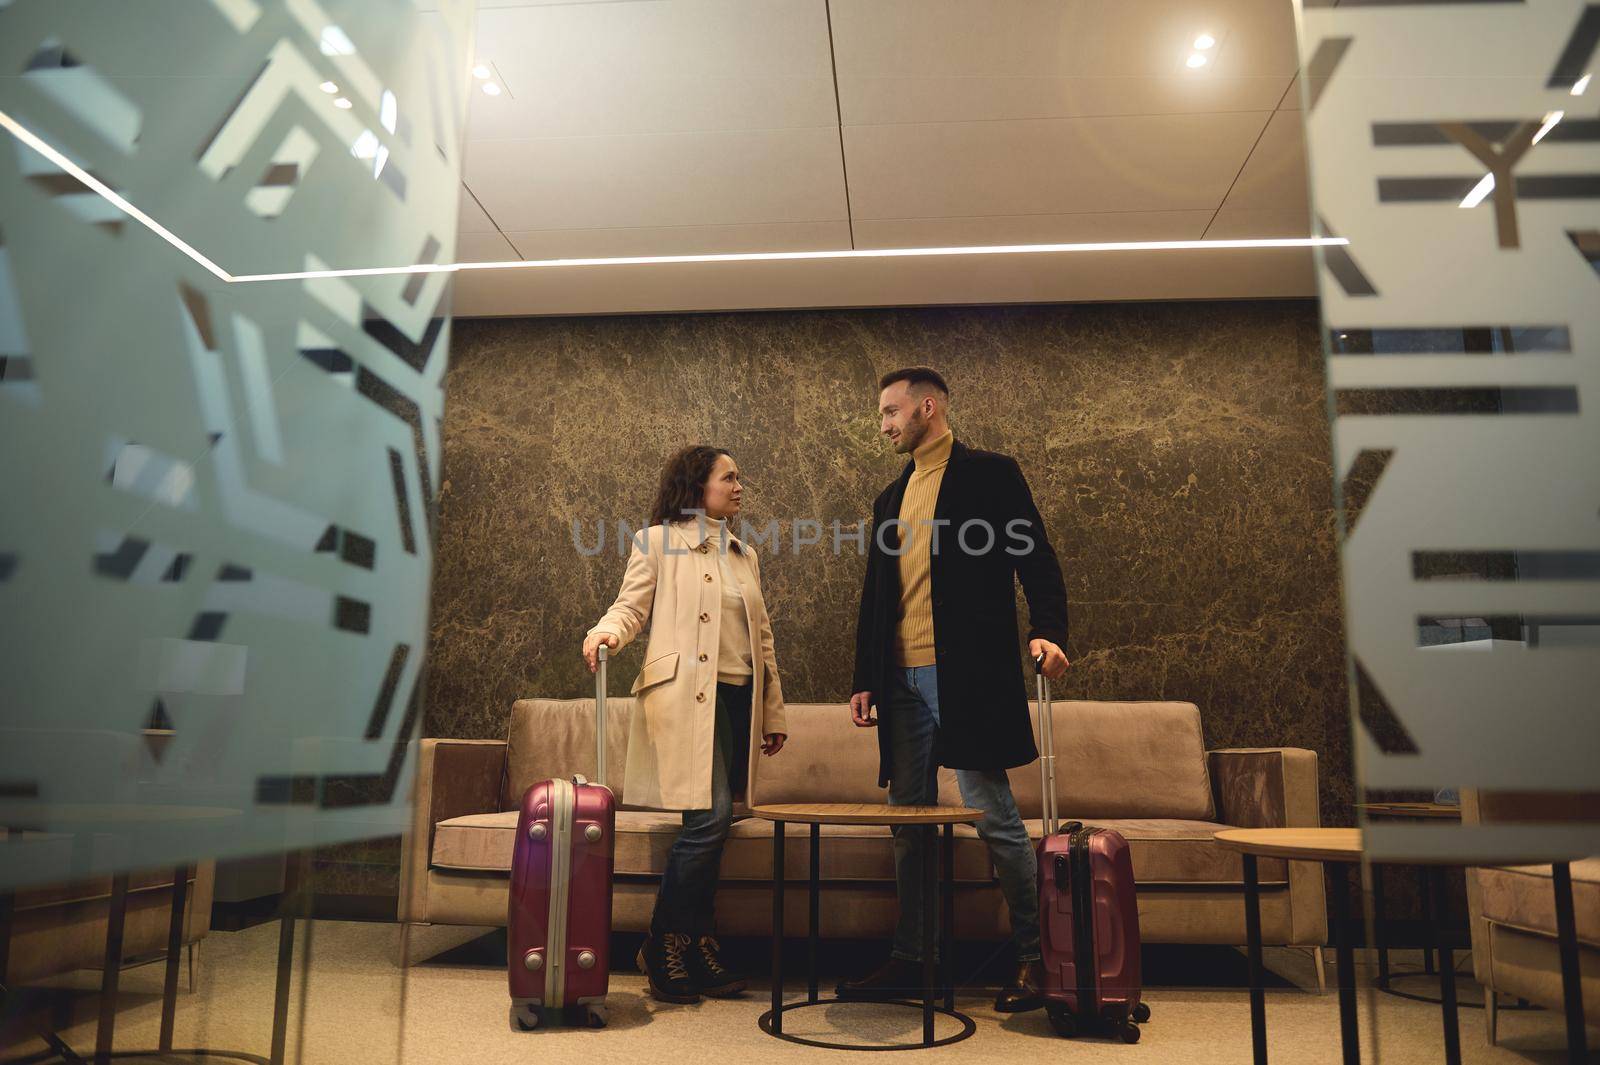 Handsome attractive businessman talking to his business partner, beautiful woman standing with suitcases at the exit from the conference room in the airport terminal ready to board the flight together